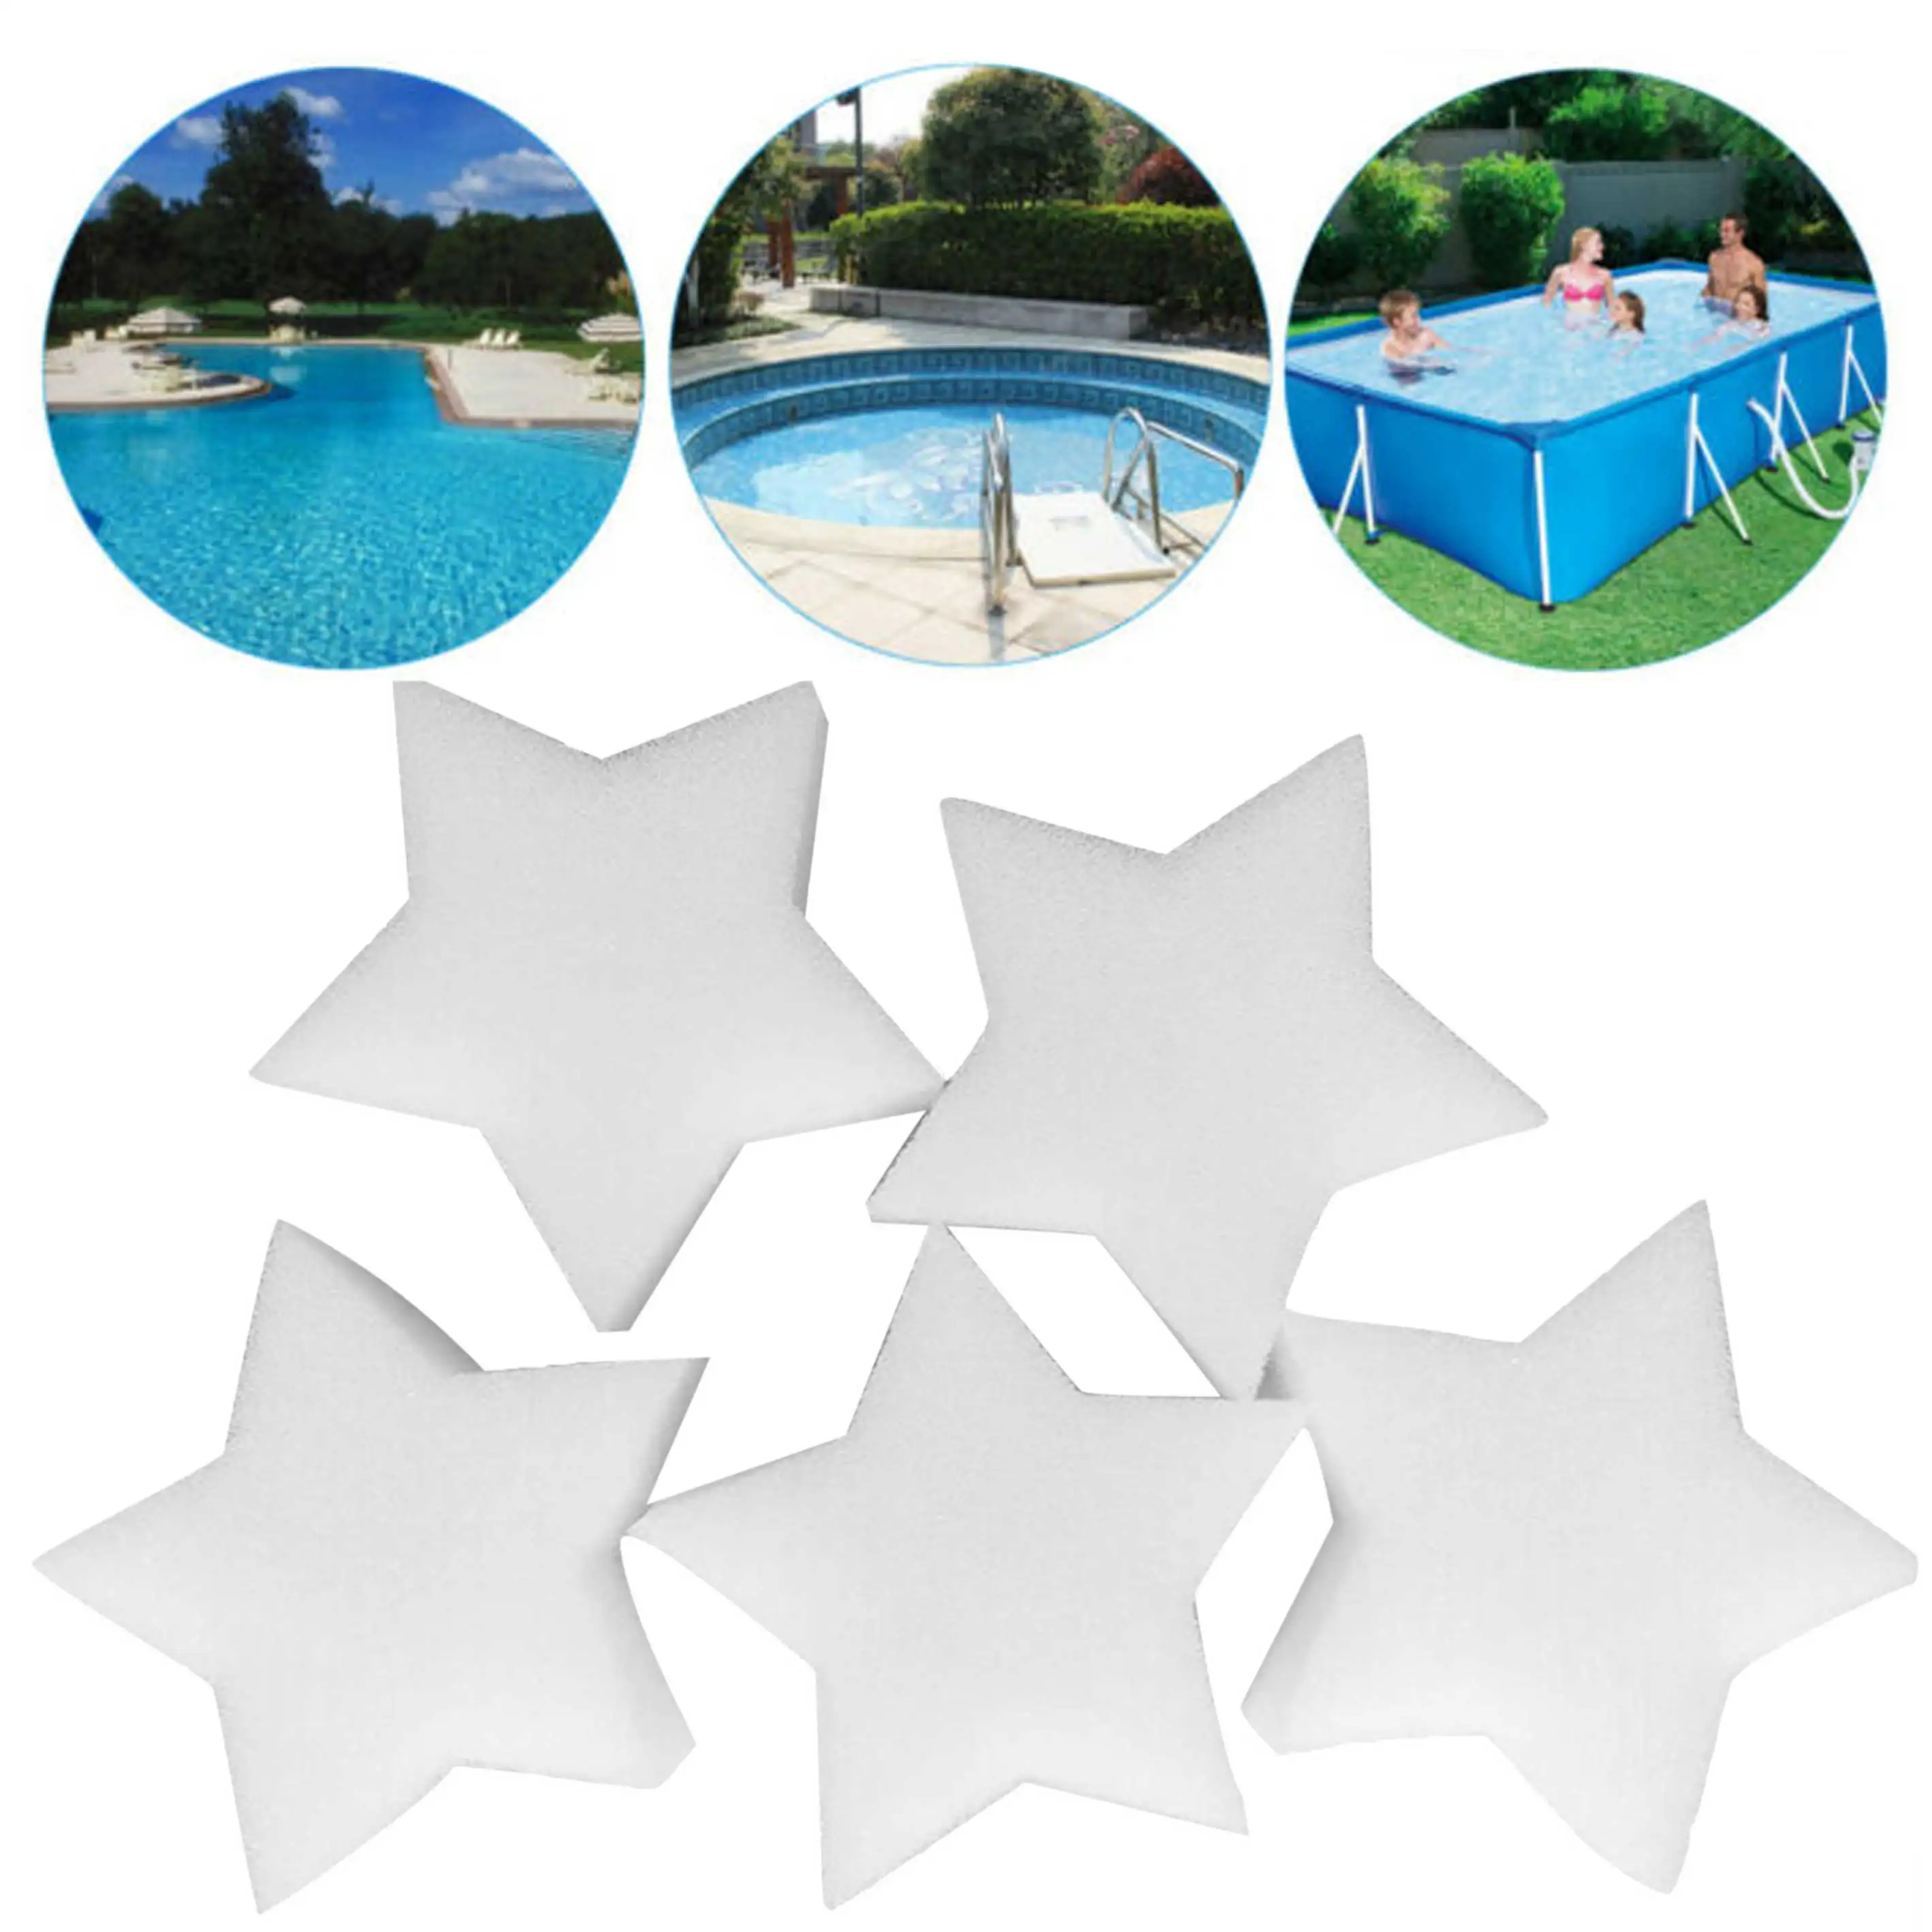 

10pcs Grime Scum Hot Tub Filter Sponge Oil Absorbing White Swimming Pool Bathtub Star Shaped Cleaning Tool Spas Washable Durable